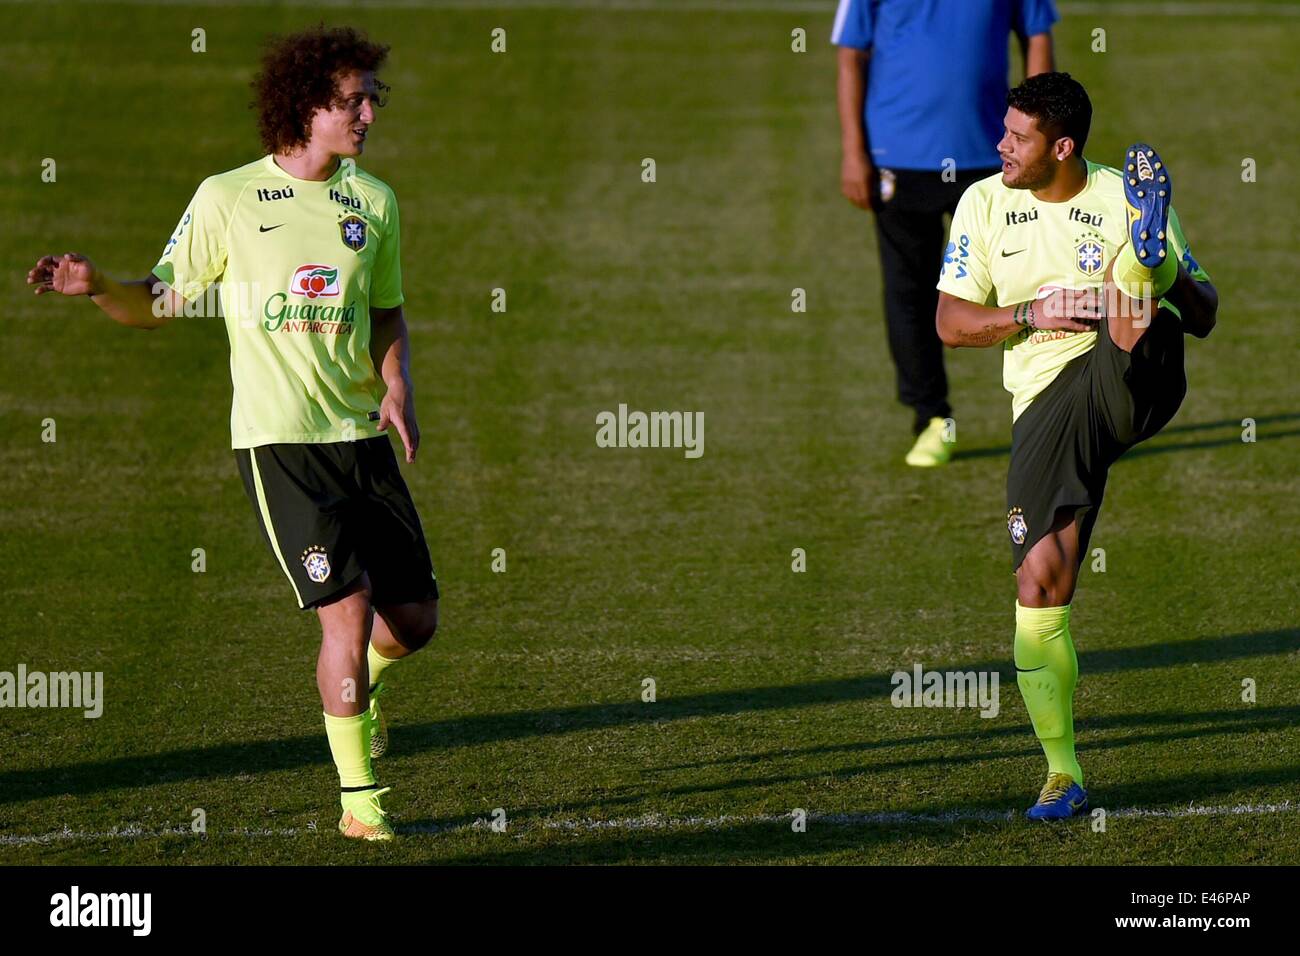 Fortaleza, Brazil. 3rd July, 2014. Brazil's David Luiz (L) and Hulk practice during a training session before the quaterfinal World Cup soccer match between Brazil and Colombia in Fortaleza, Brazil, 3 July 2014. Photo: Marius Becker/dpa/Alamy Live News Stock Photo